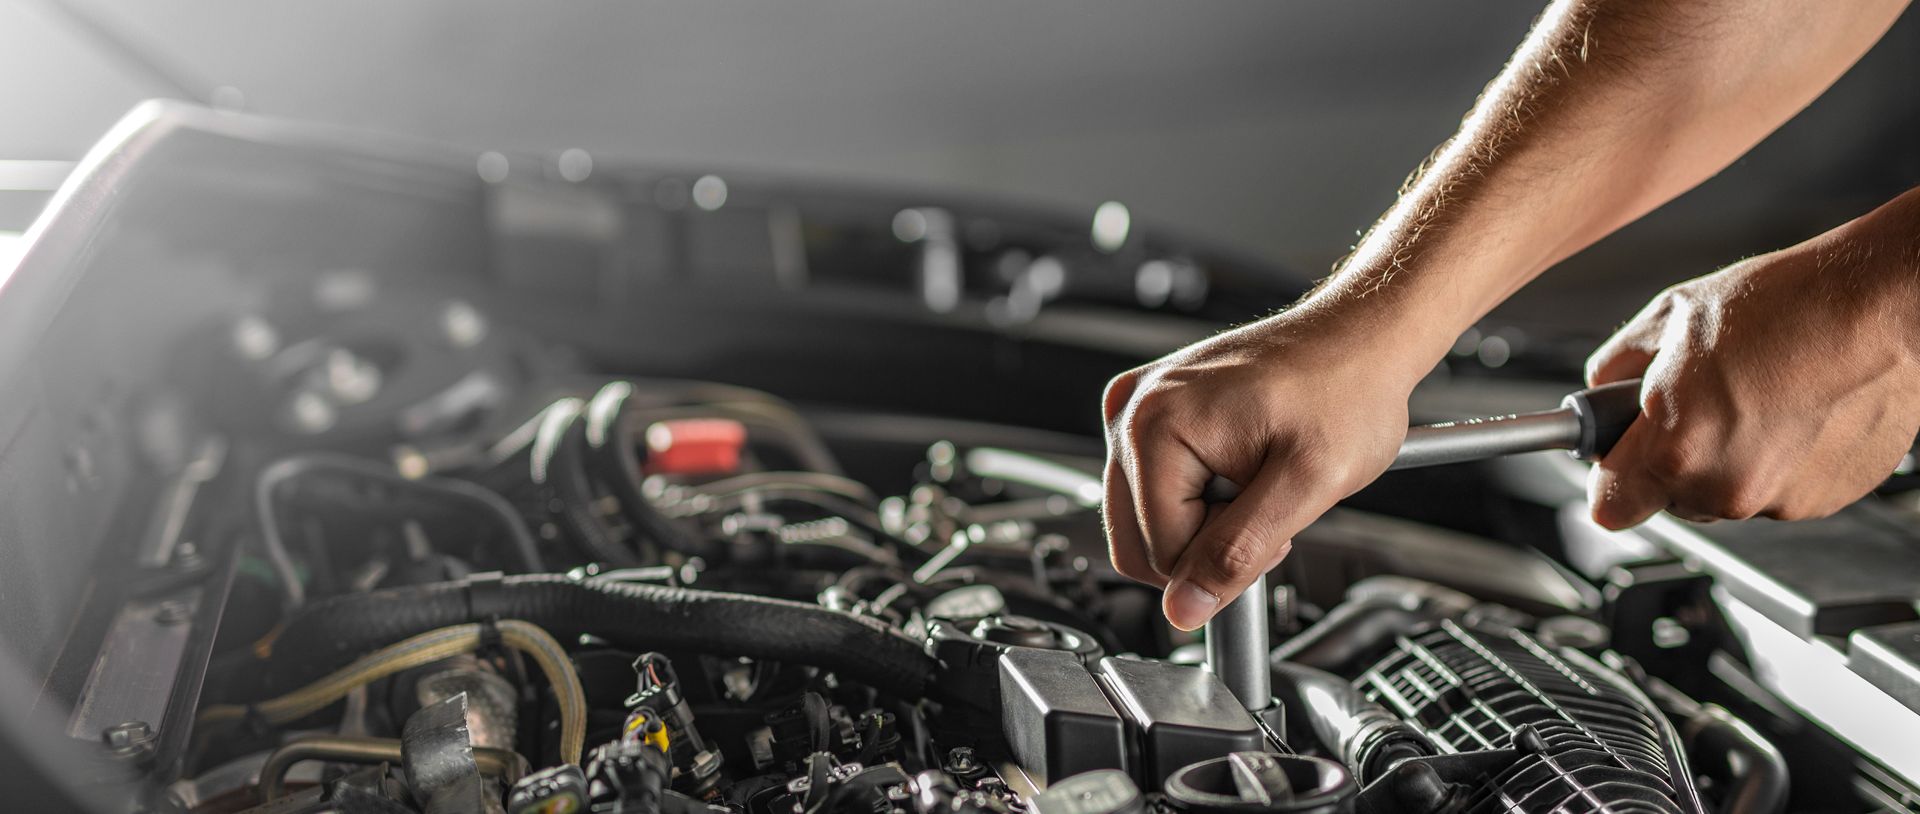 Engine Maintenance Tips & Tricks You Need To Know | Gerry's Service